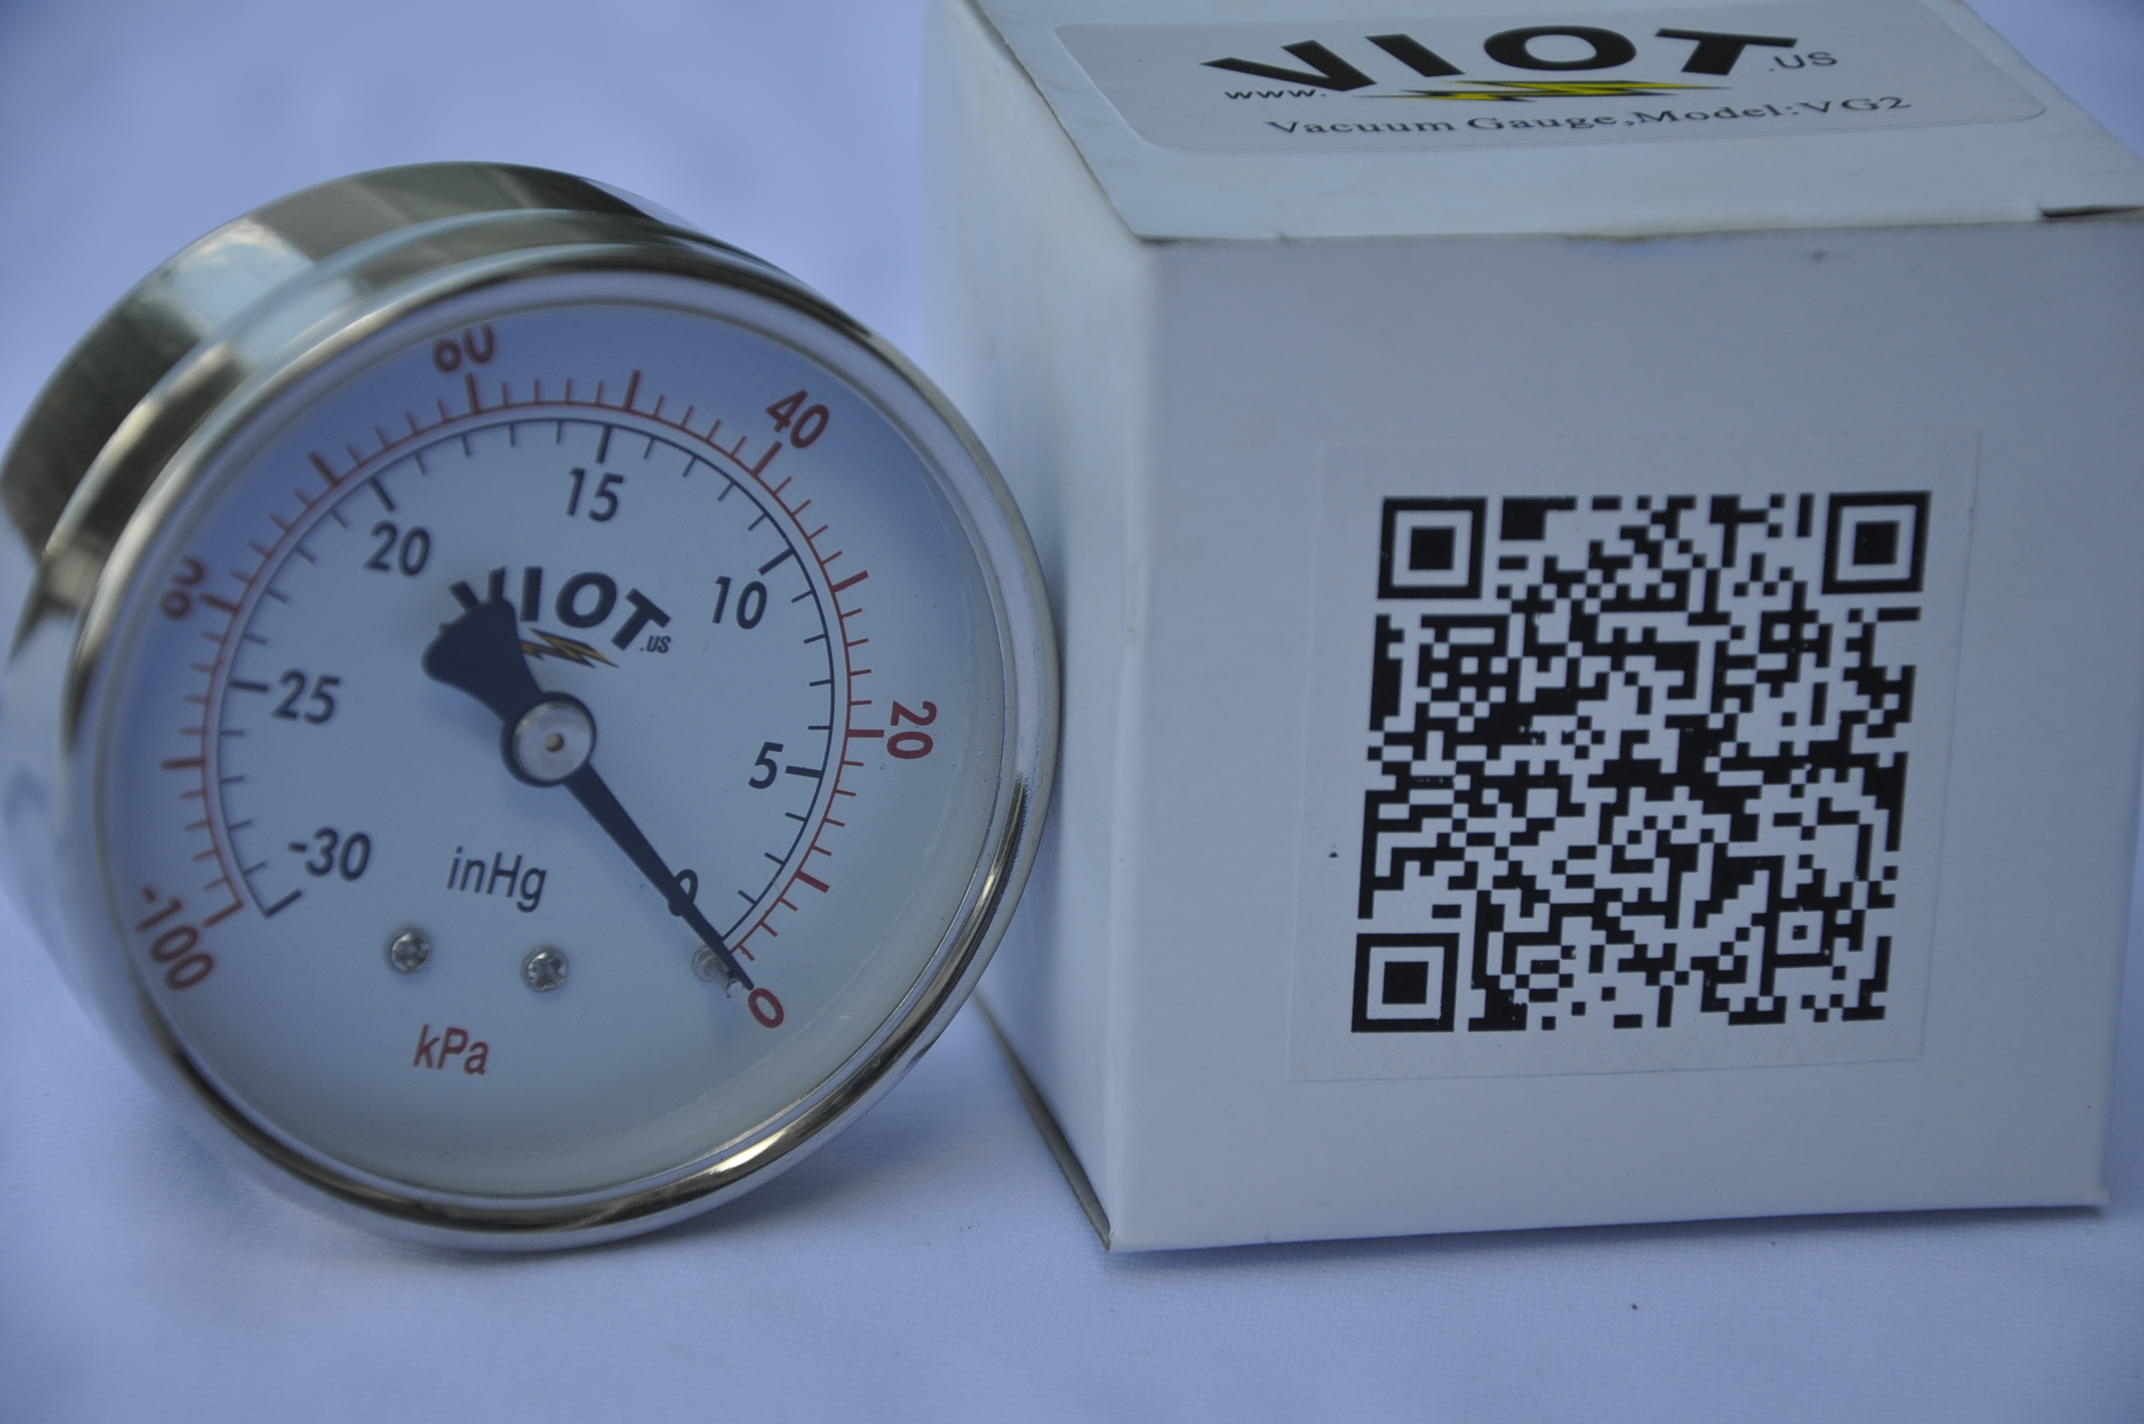 Professional HVAC ToolAnalog Vacuum Gauge, from 0 to 30 inch Hg/0 to